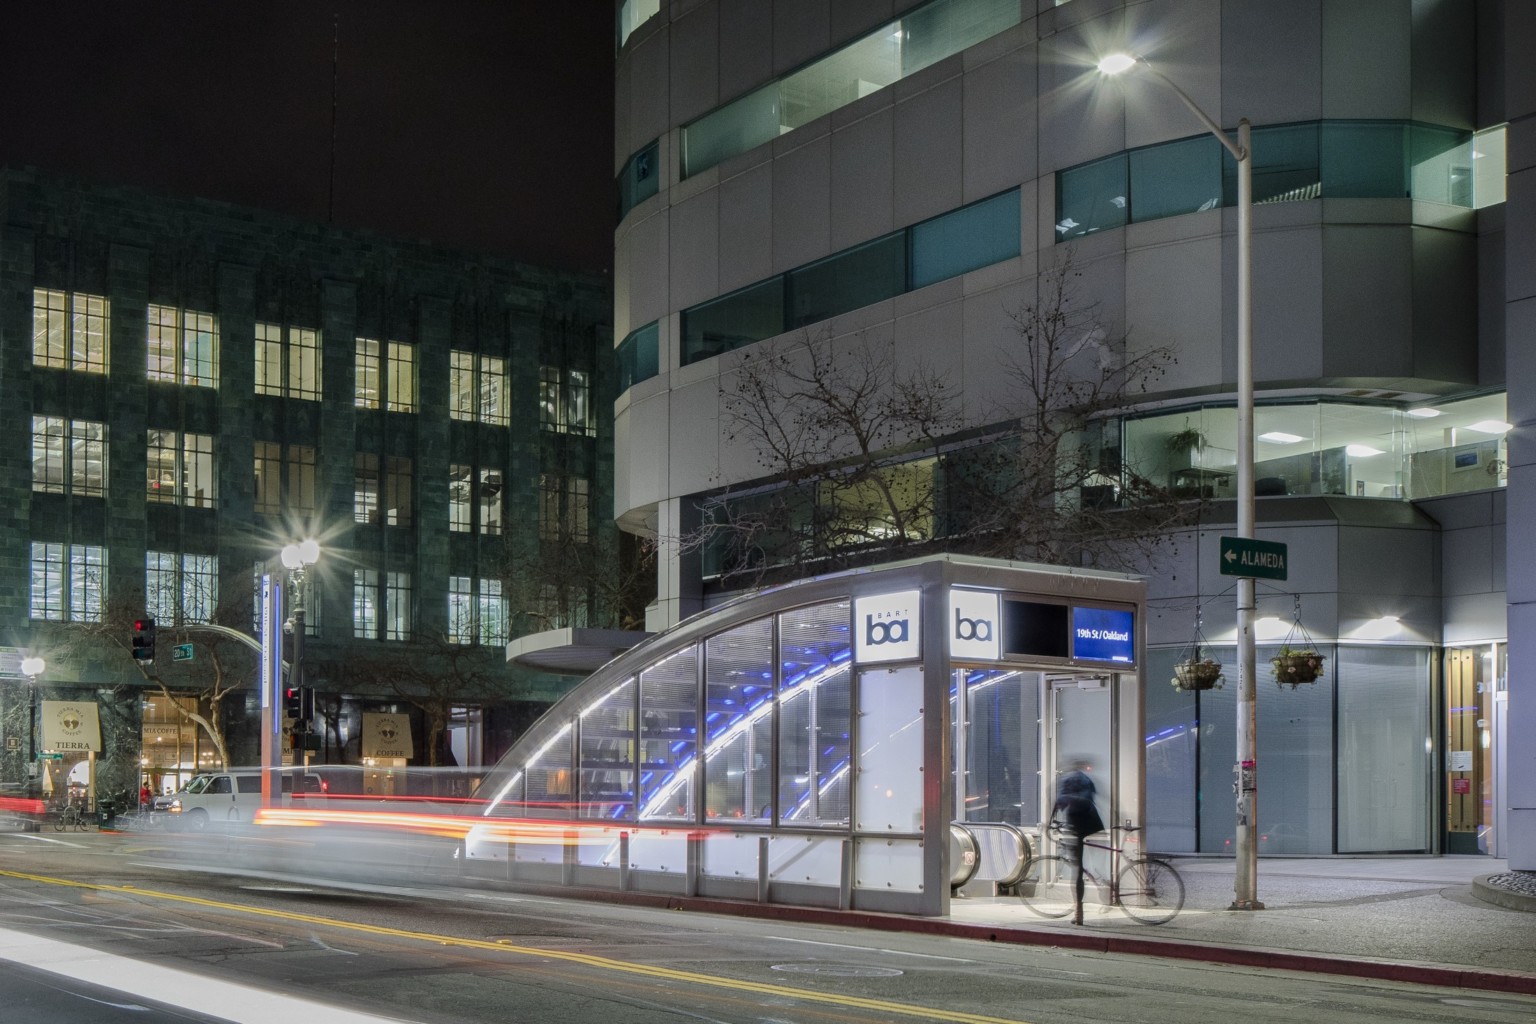 Bay Area Rapid Transit station street level entrance at 19th Street and Oakland. A blue and glass shelter leading underground